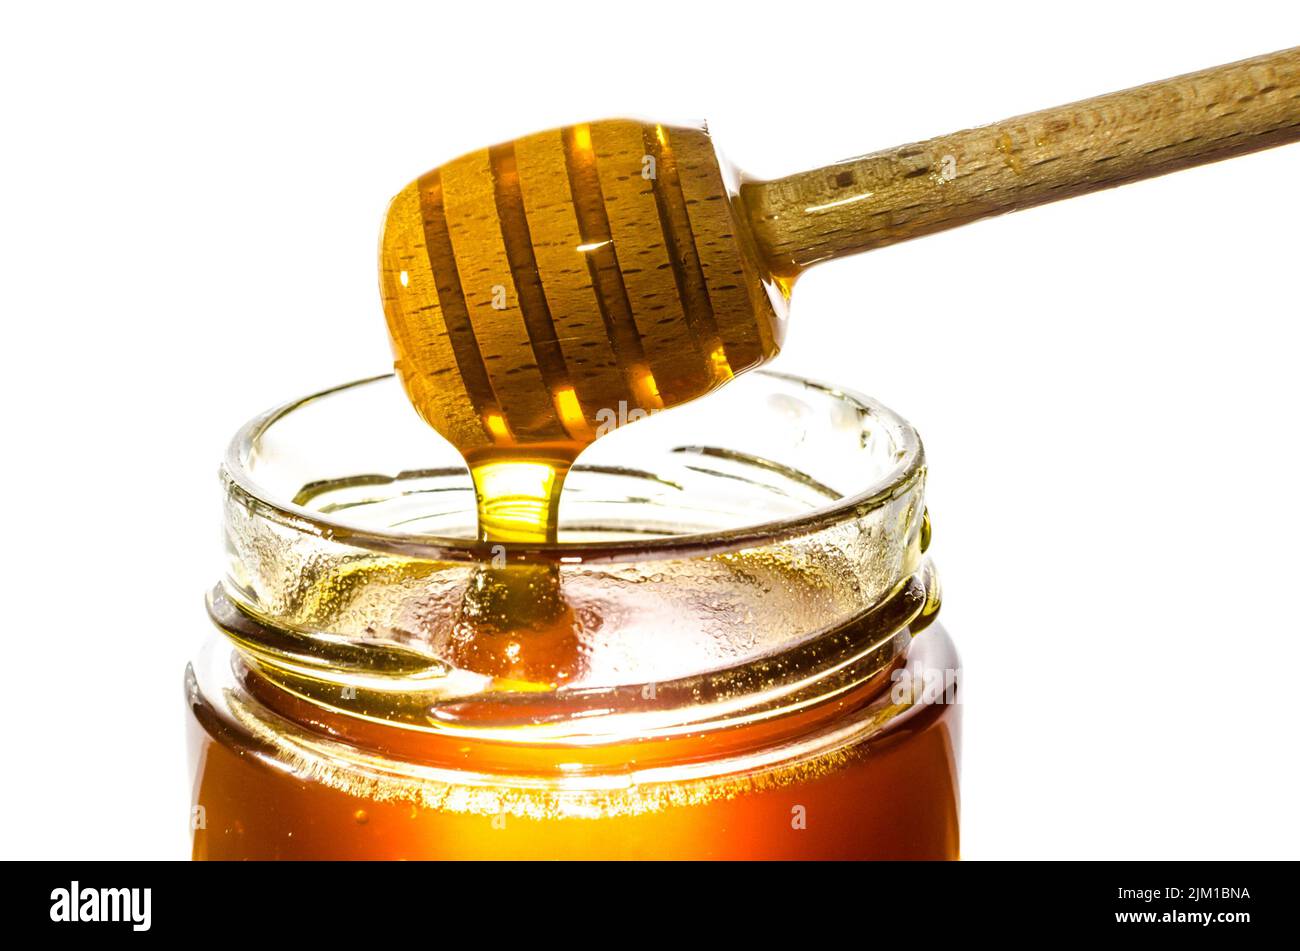 Getting honey from a jar with a honey spoon isolated on white background Stock Photo